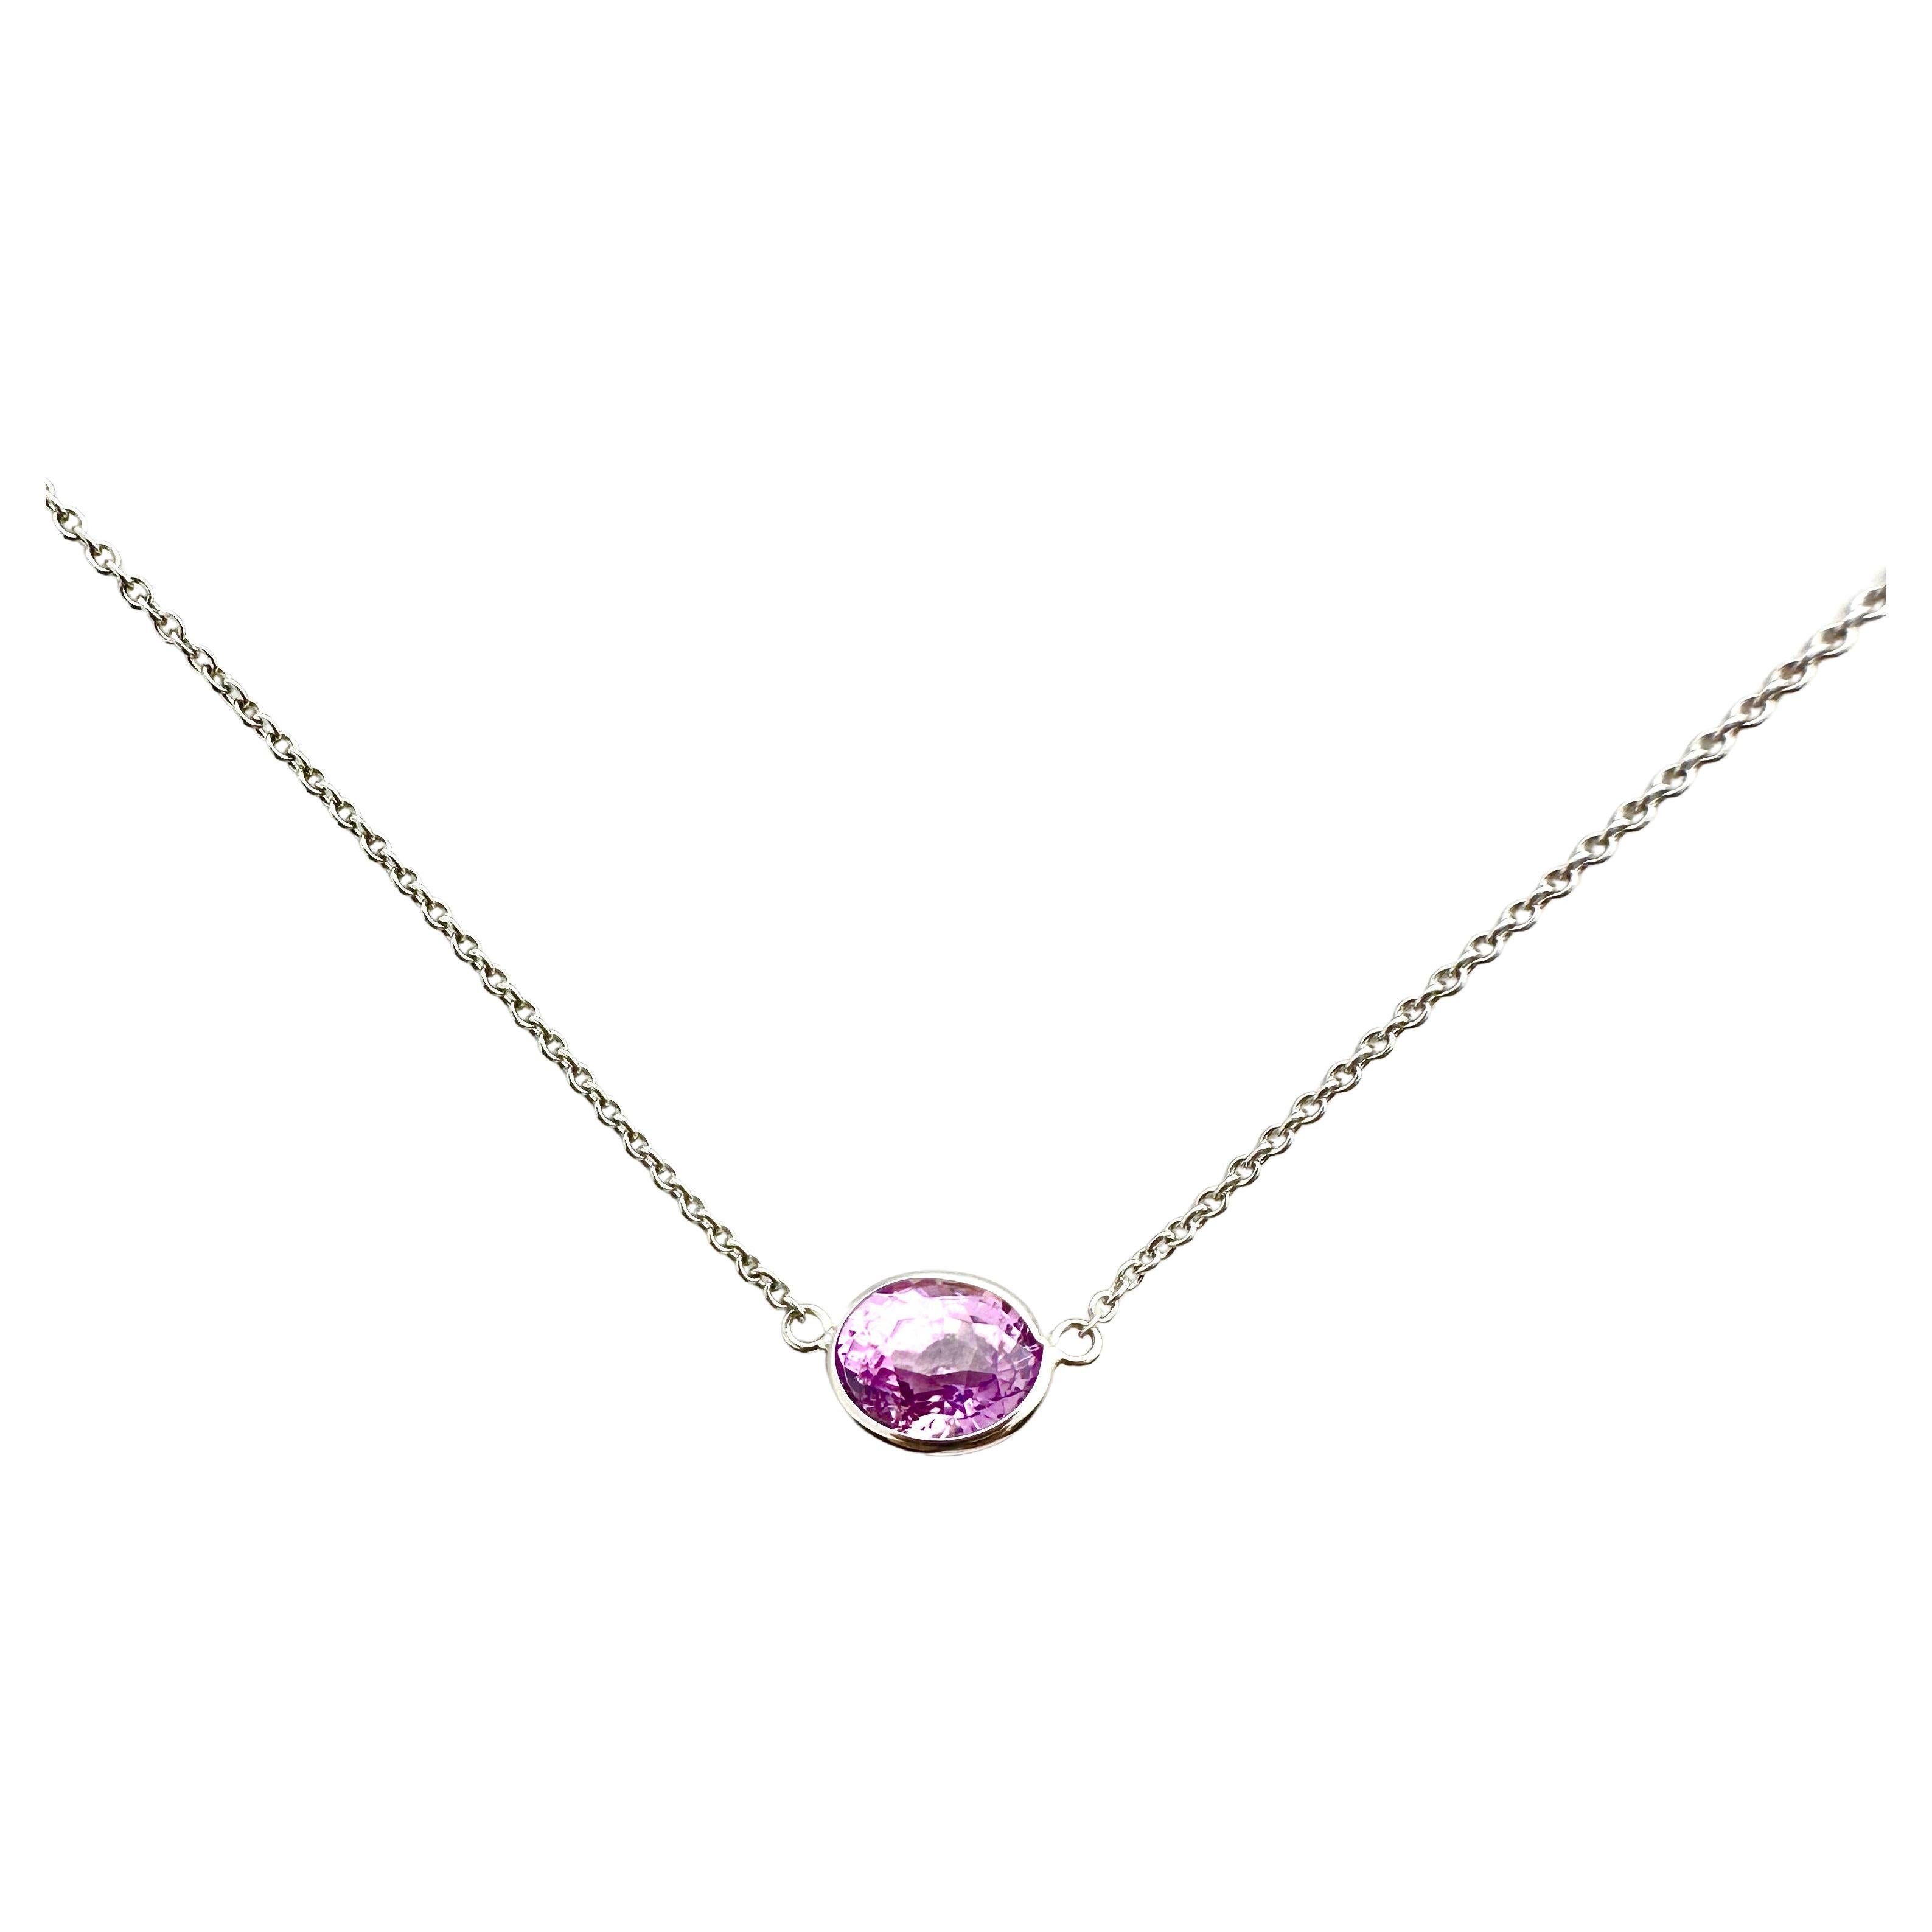 2.20ct Certified Purple Sapphire Oval Cut Solitaire Necklace in 14k WG